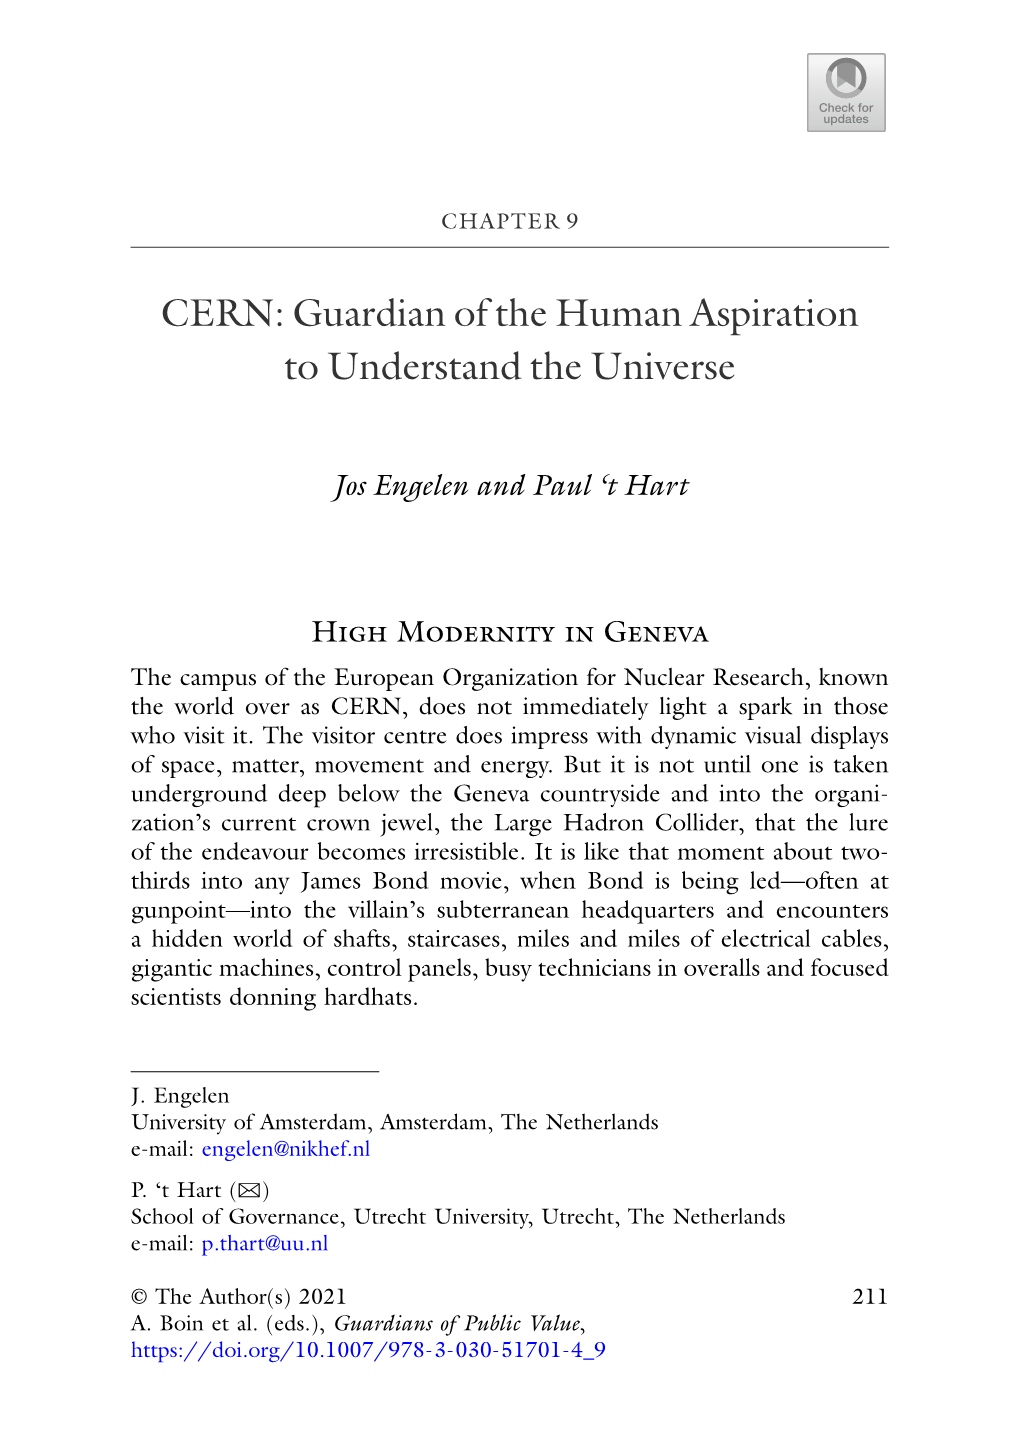 CERN: Guardian of the Human Aspiration to Understand the Universe